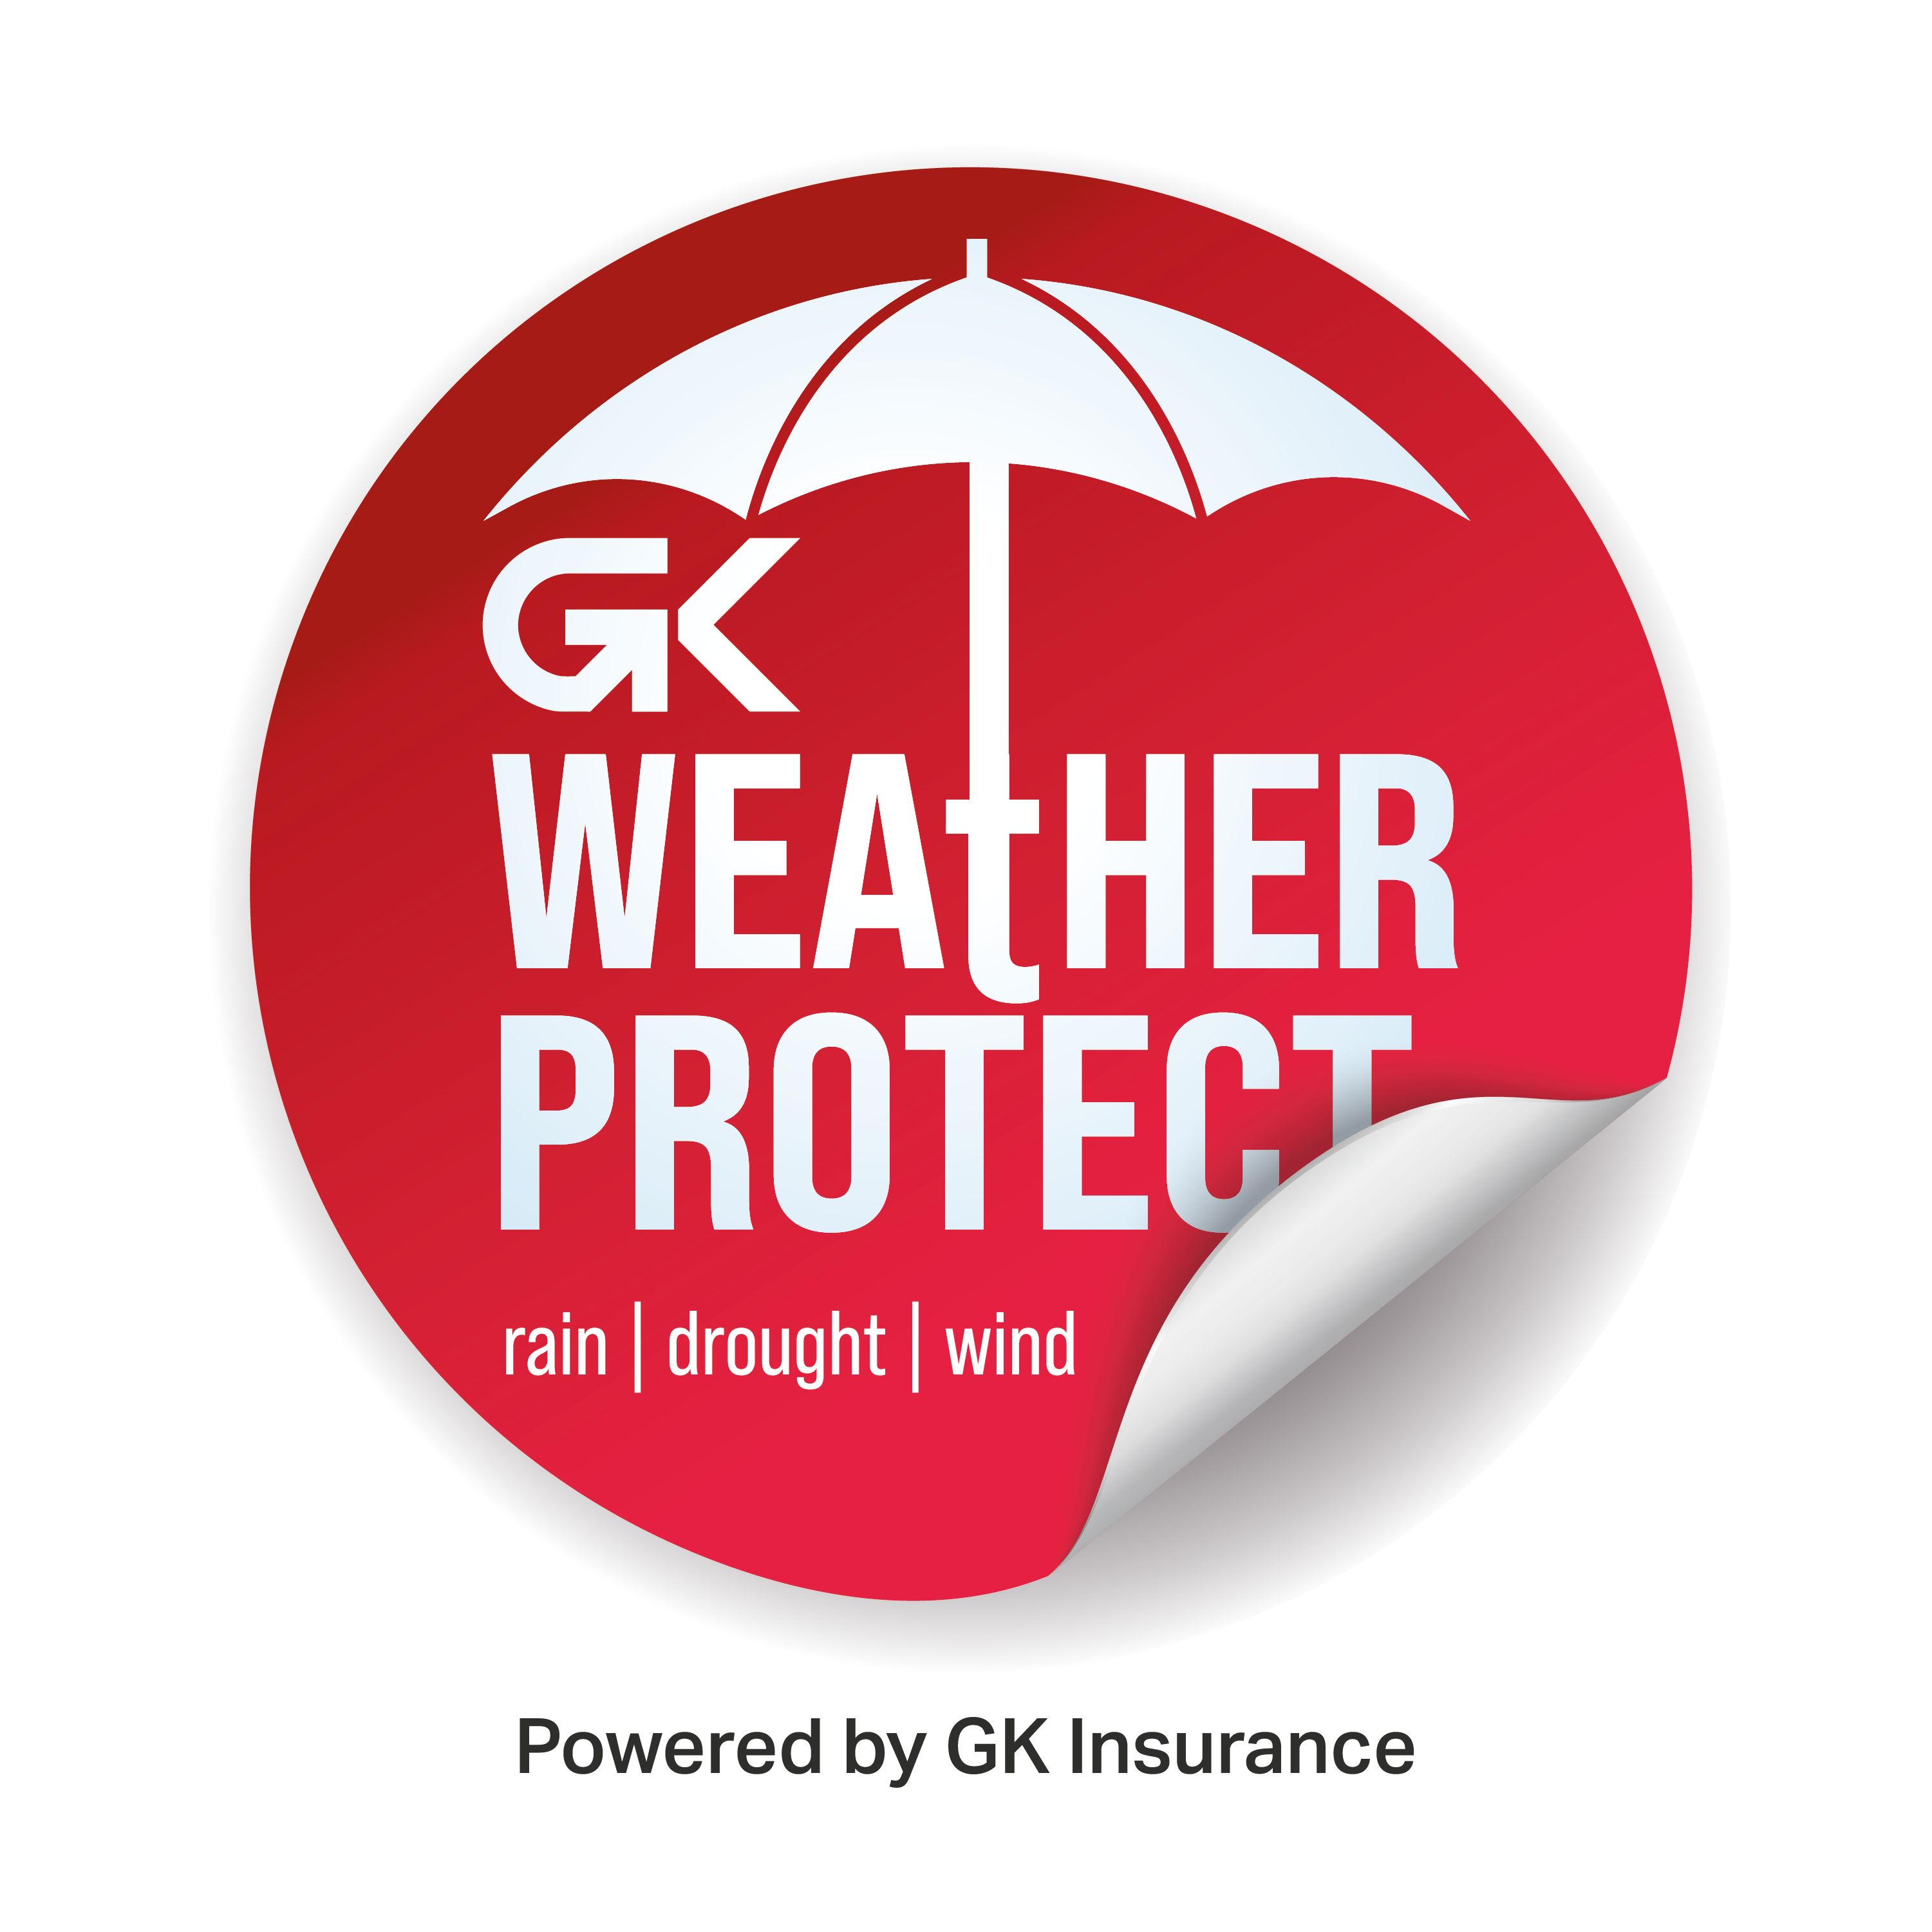 GK Weather Protect